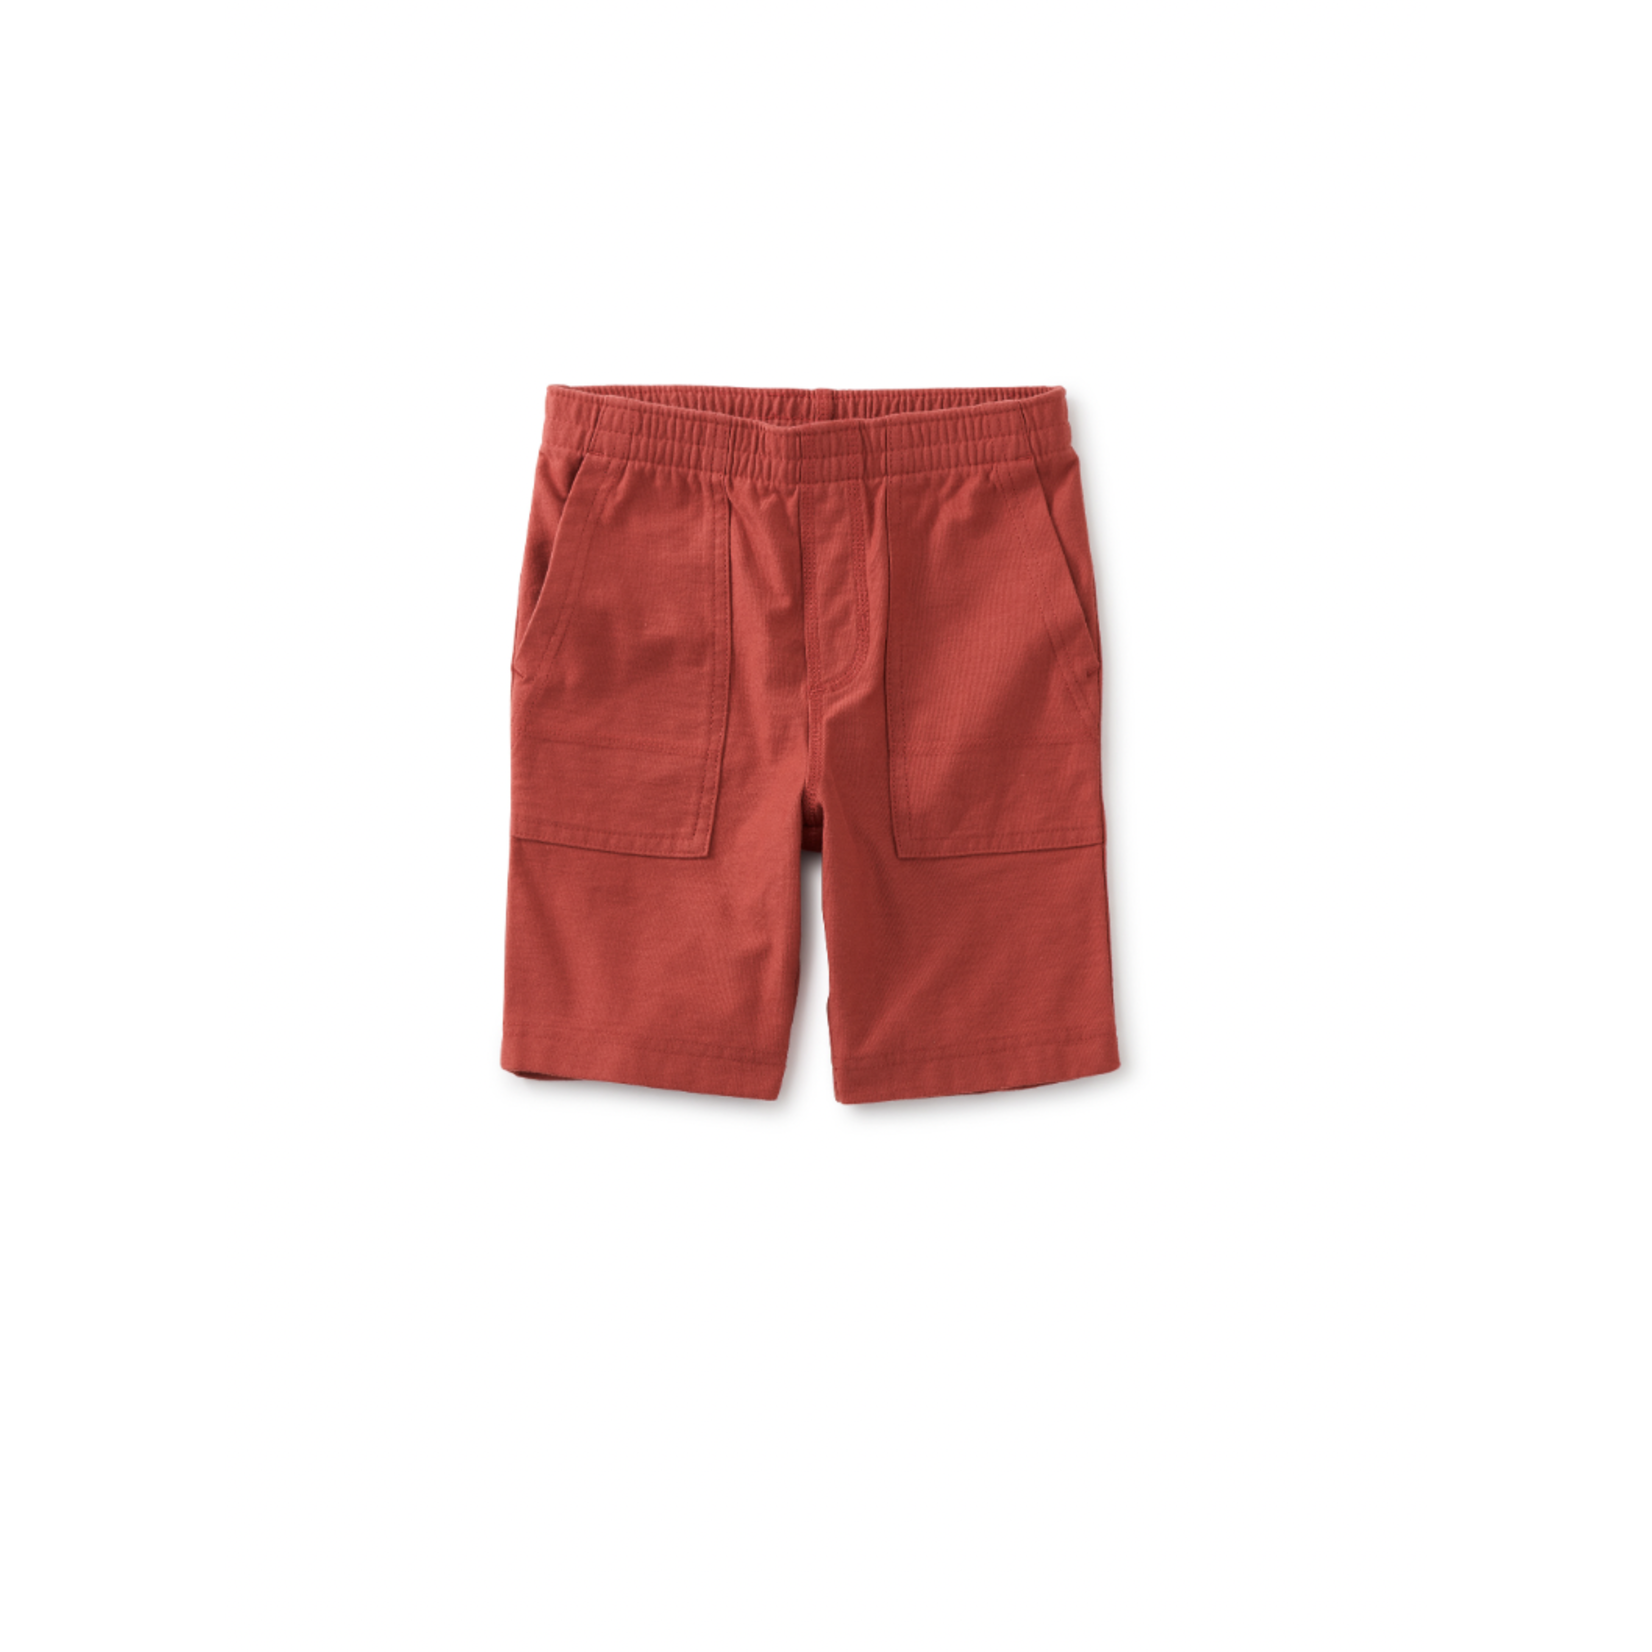 Tea Collection Playwear Shorts-Earth Red - FINAL SALE